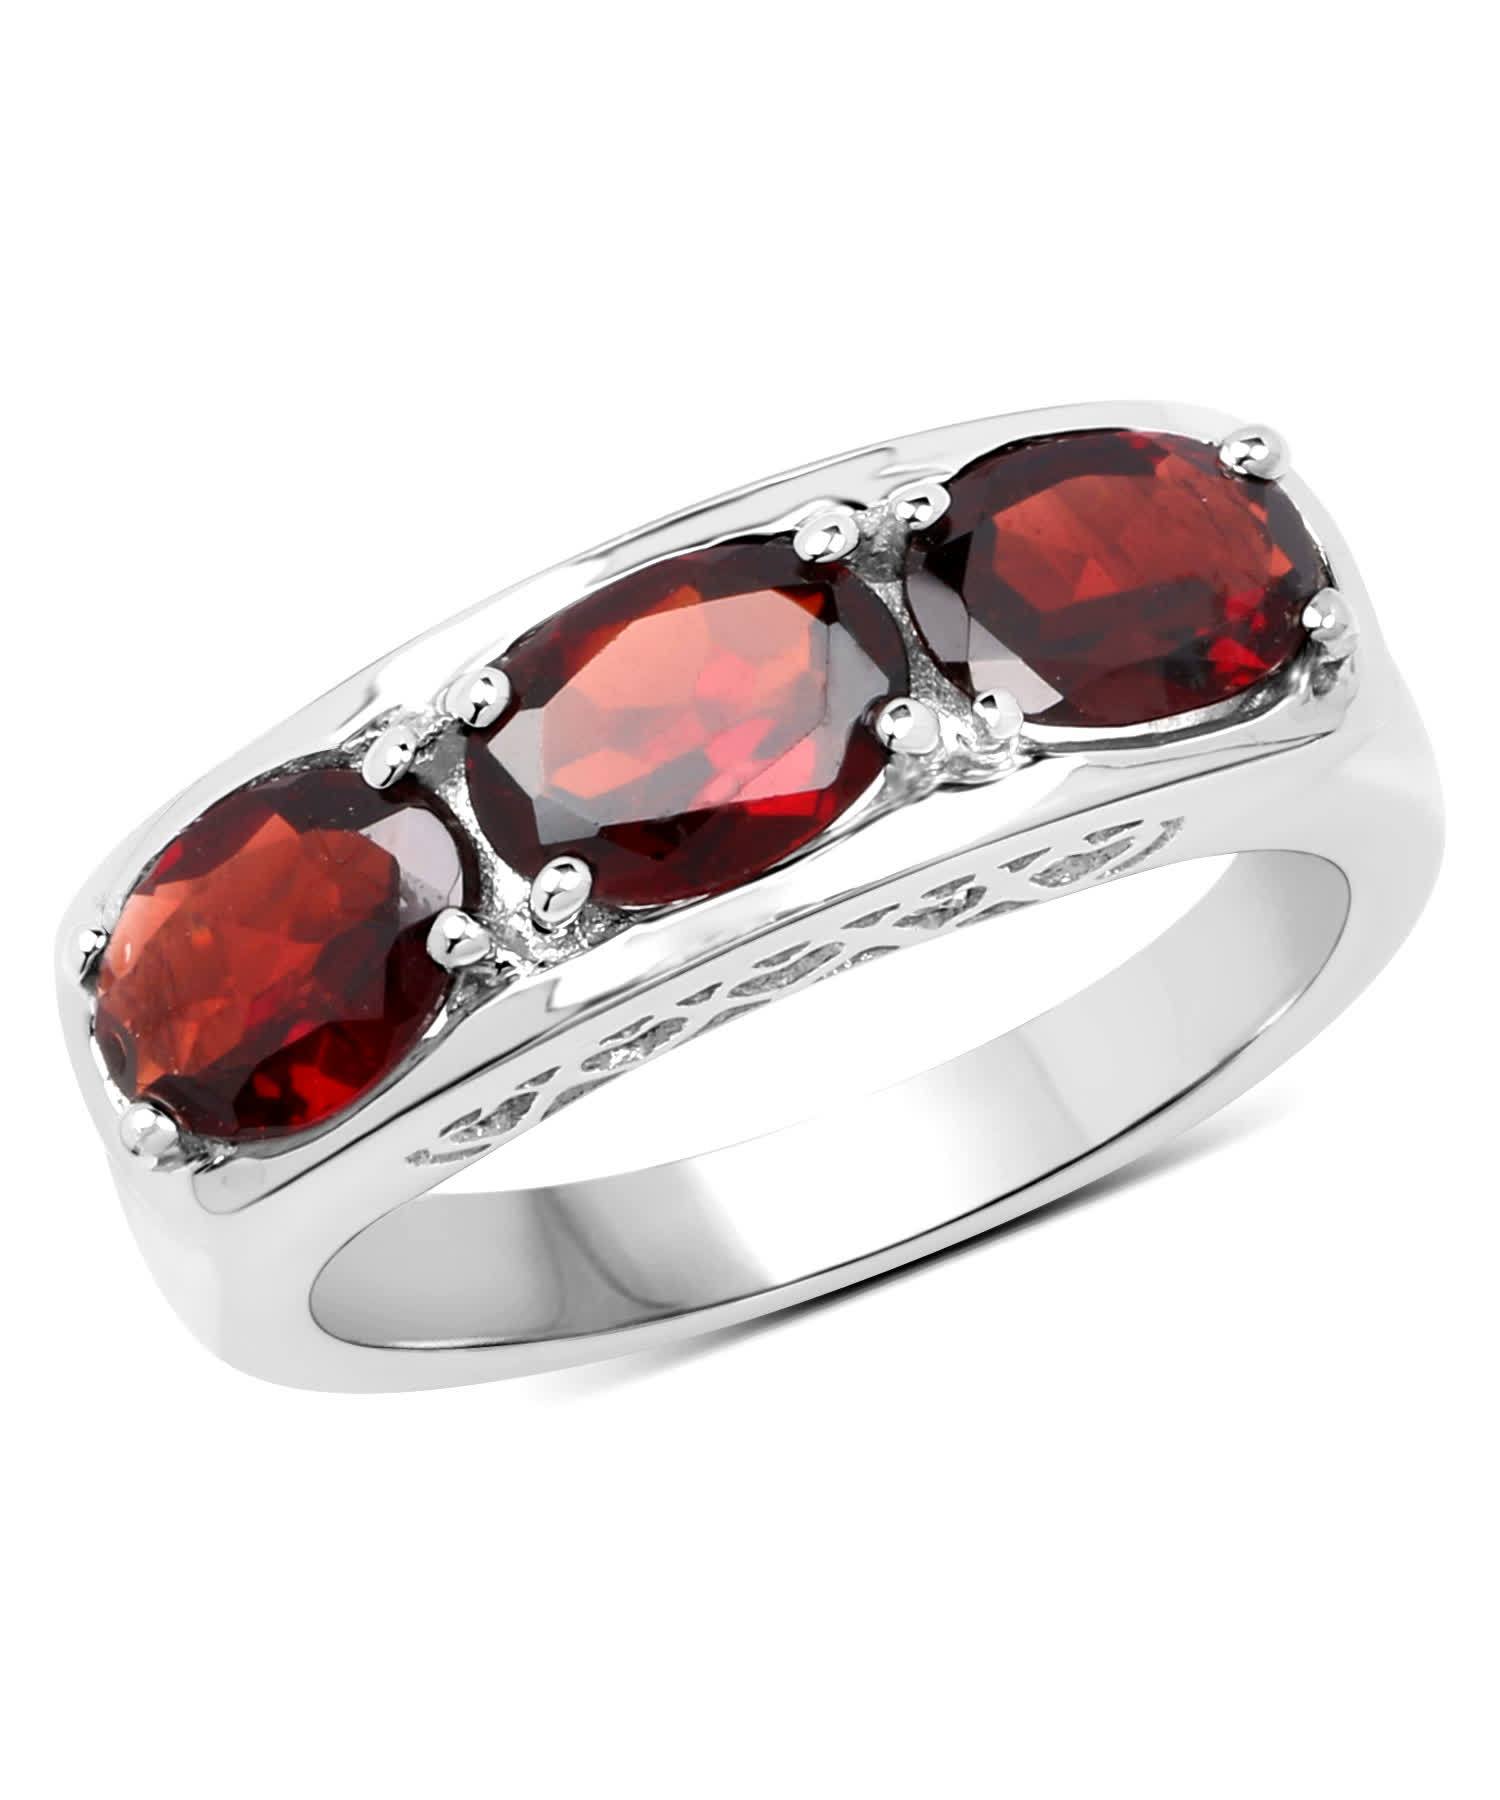 2.85ctw Natural Garnet Rhodium Plated 925 Sterling Silver Three-Stone Ring View 1